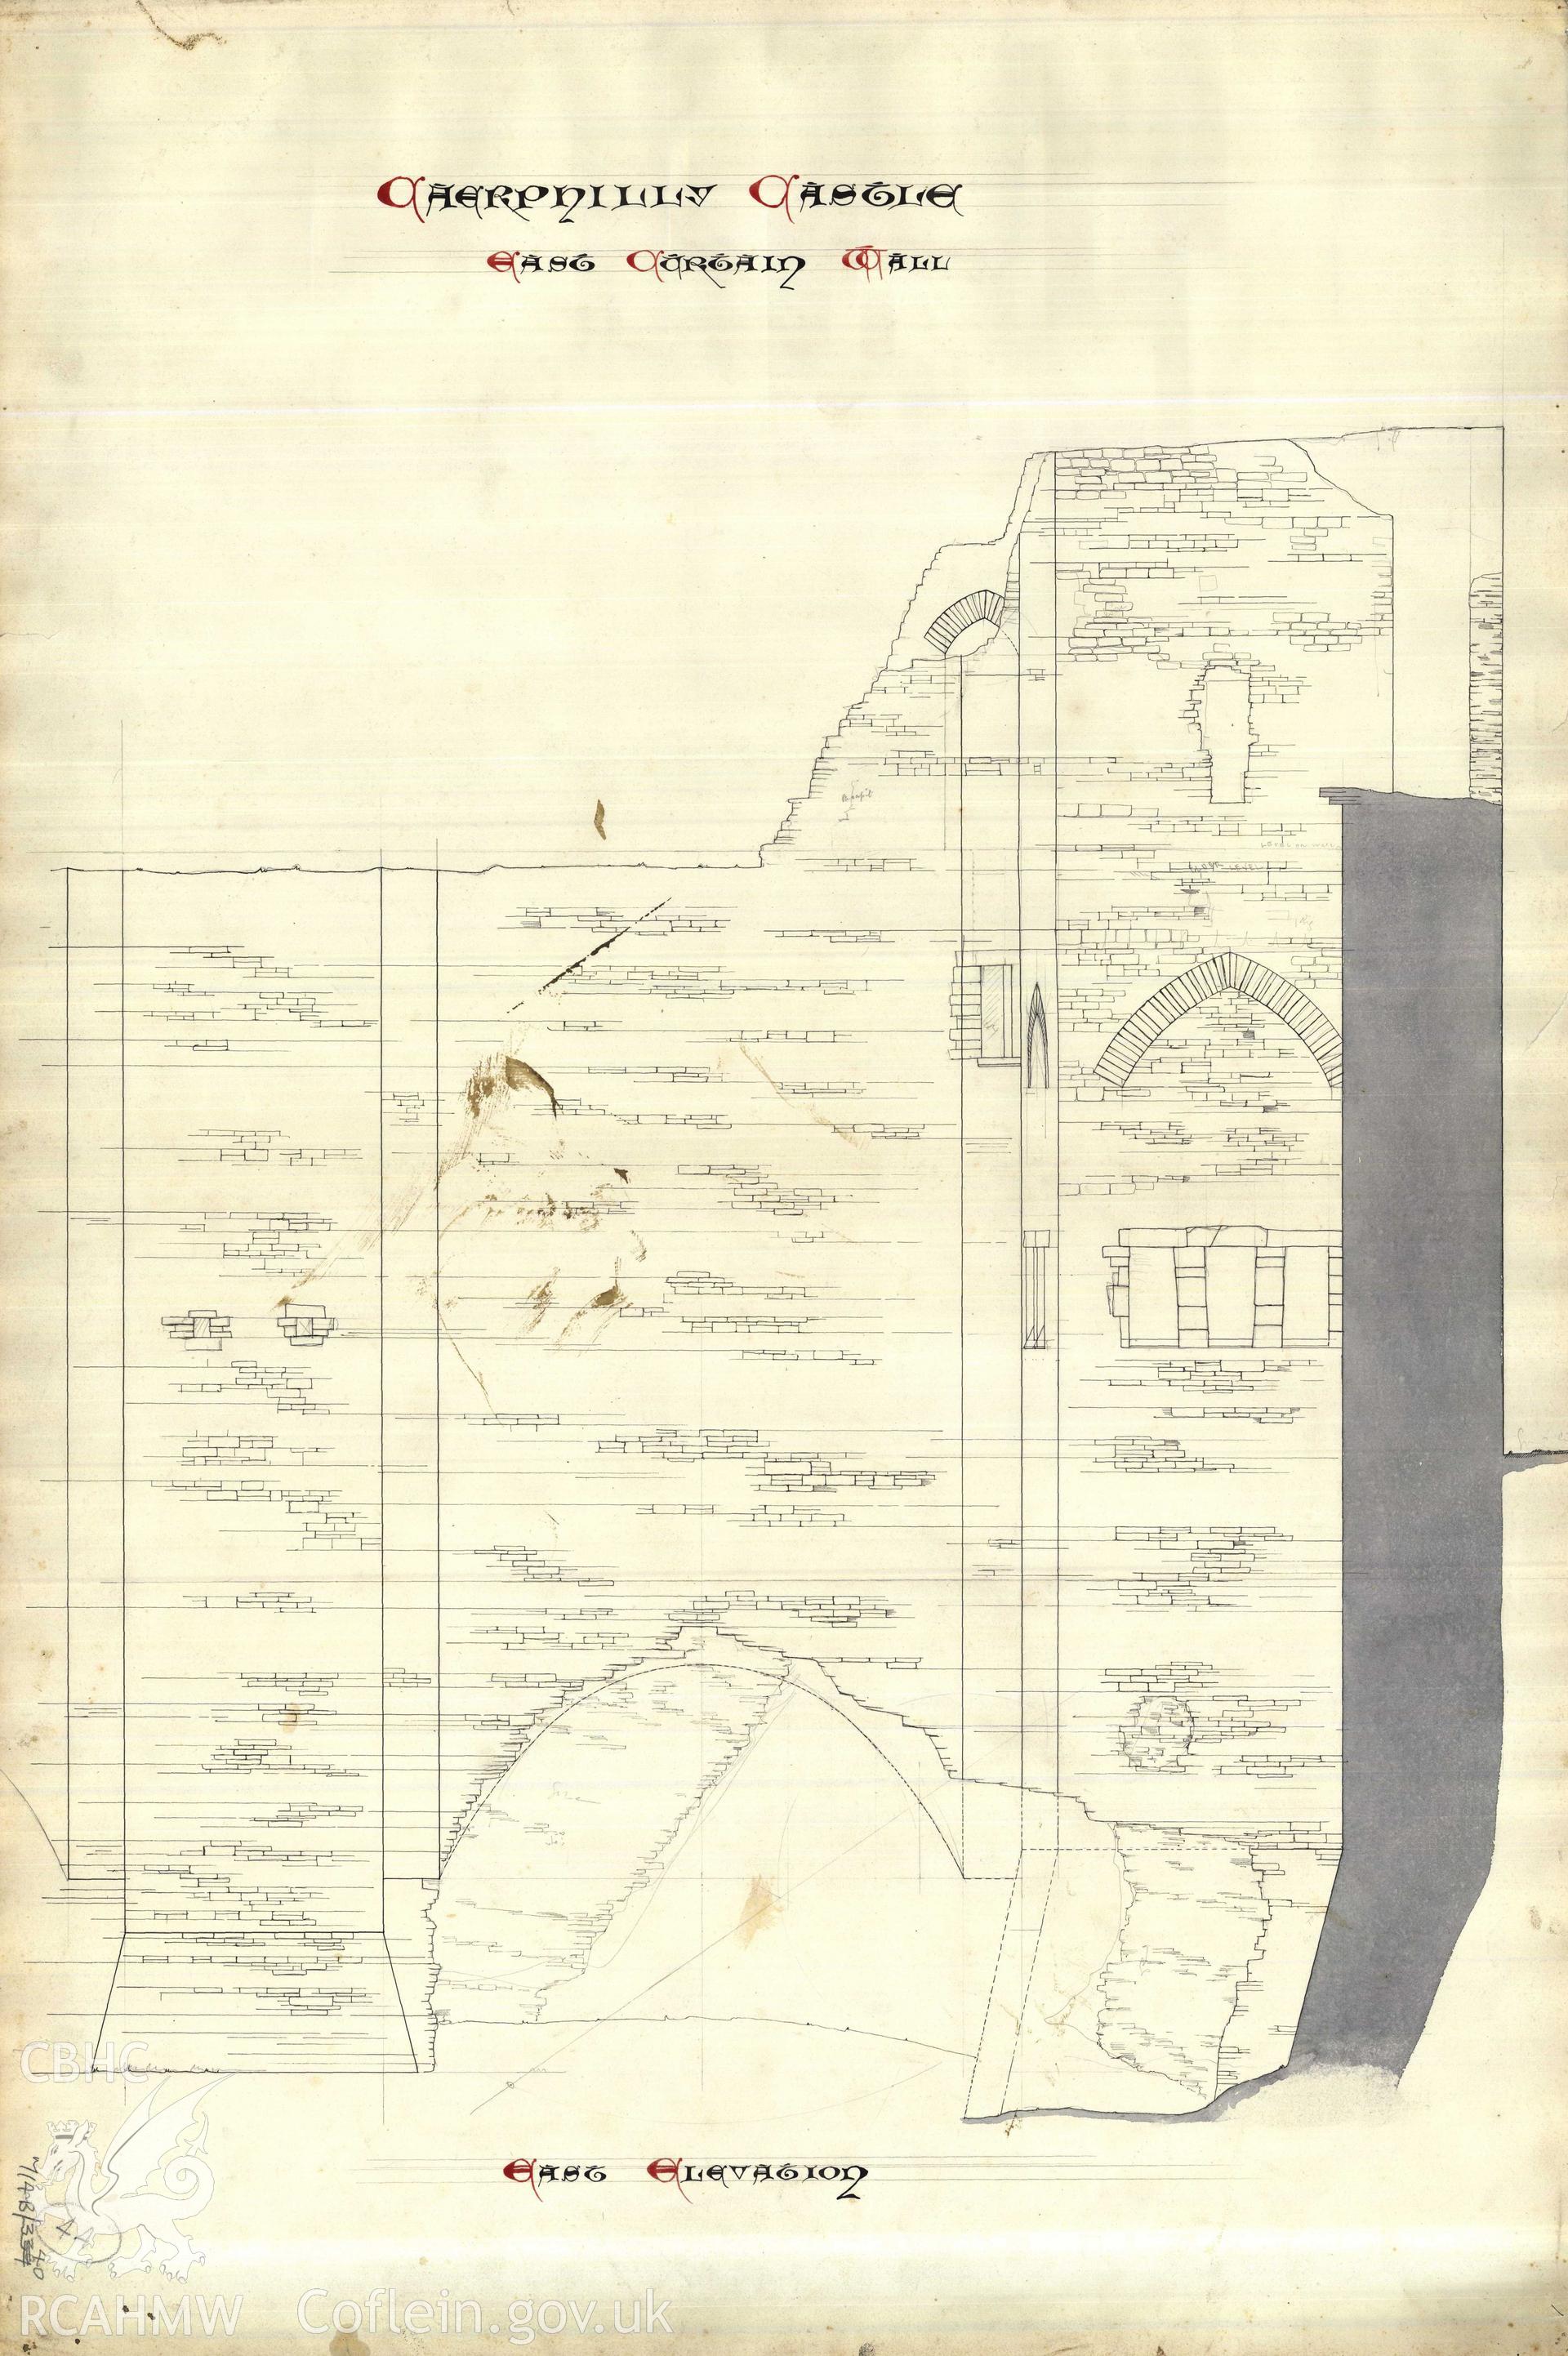 Cadw guardianship monument drawing of Caerphilly Castle. Dam front S, pt elev. Cadw Ref. No:714B/340. Scale 1:24.